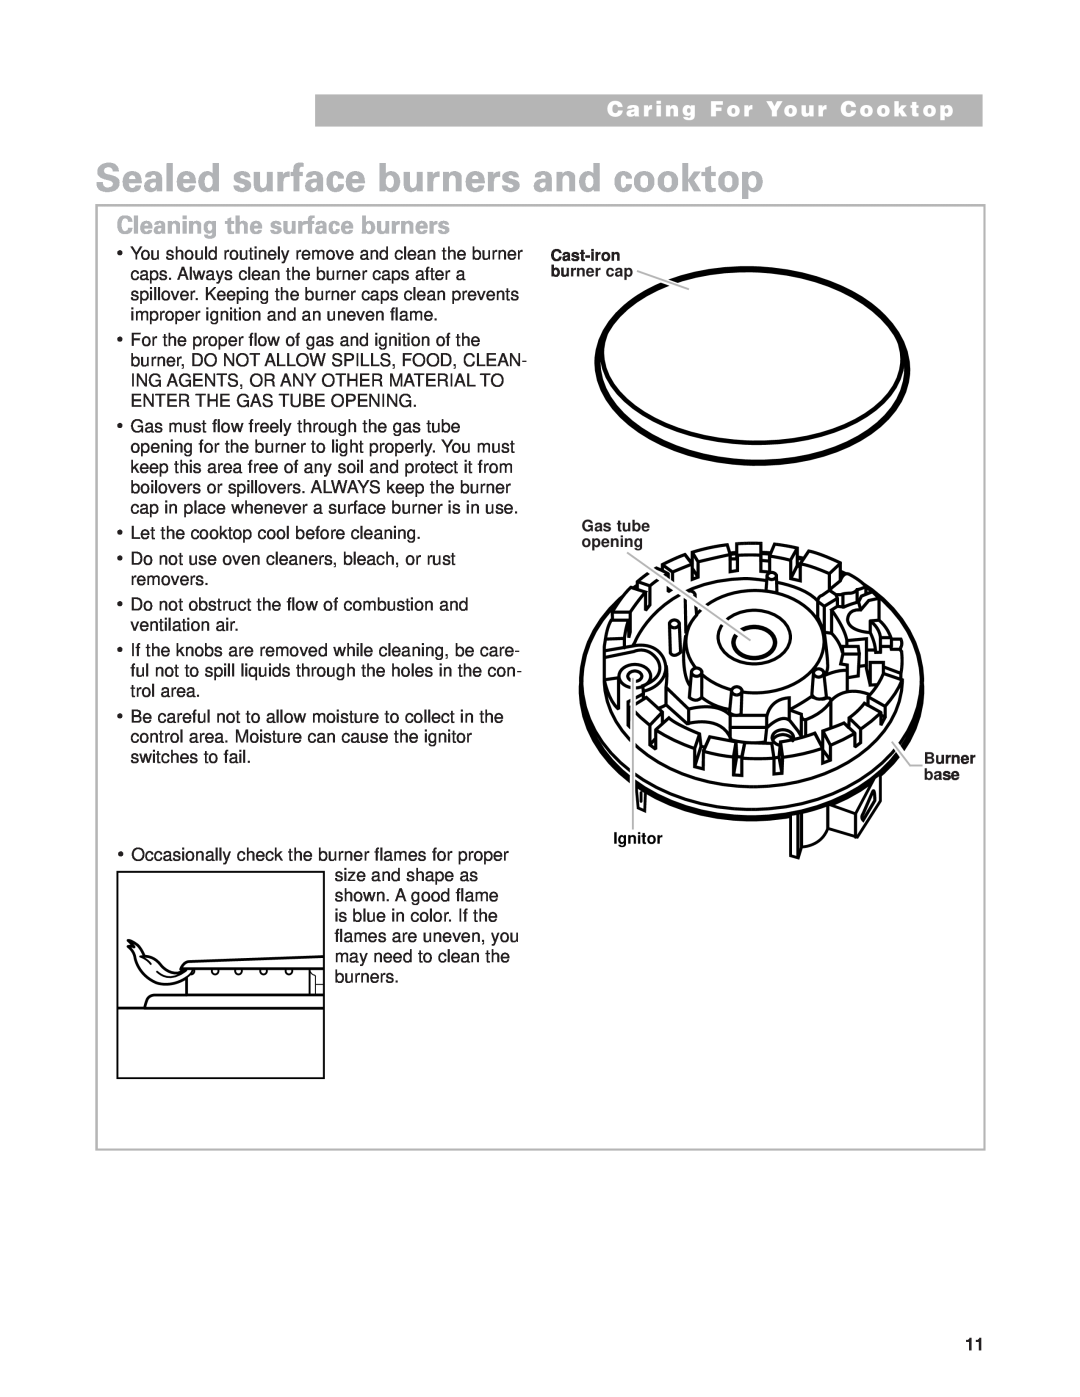 Whirlpool SCS3014G, SCS3614G Sealed surface burners and cooktop, Cleaning the surface burners, Caring For Your Cooktop 